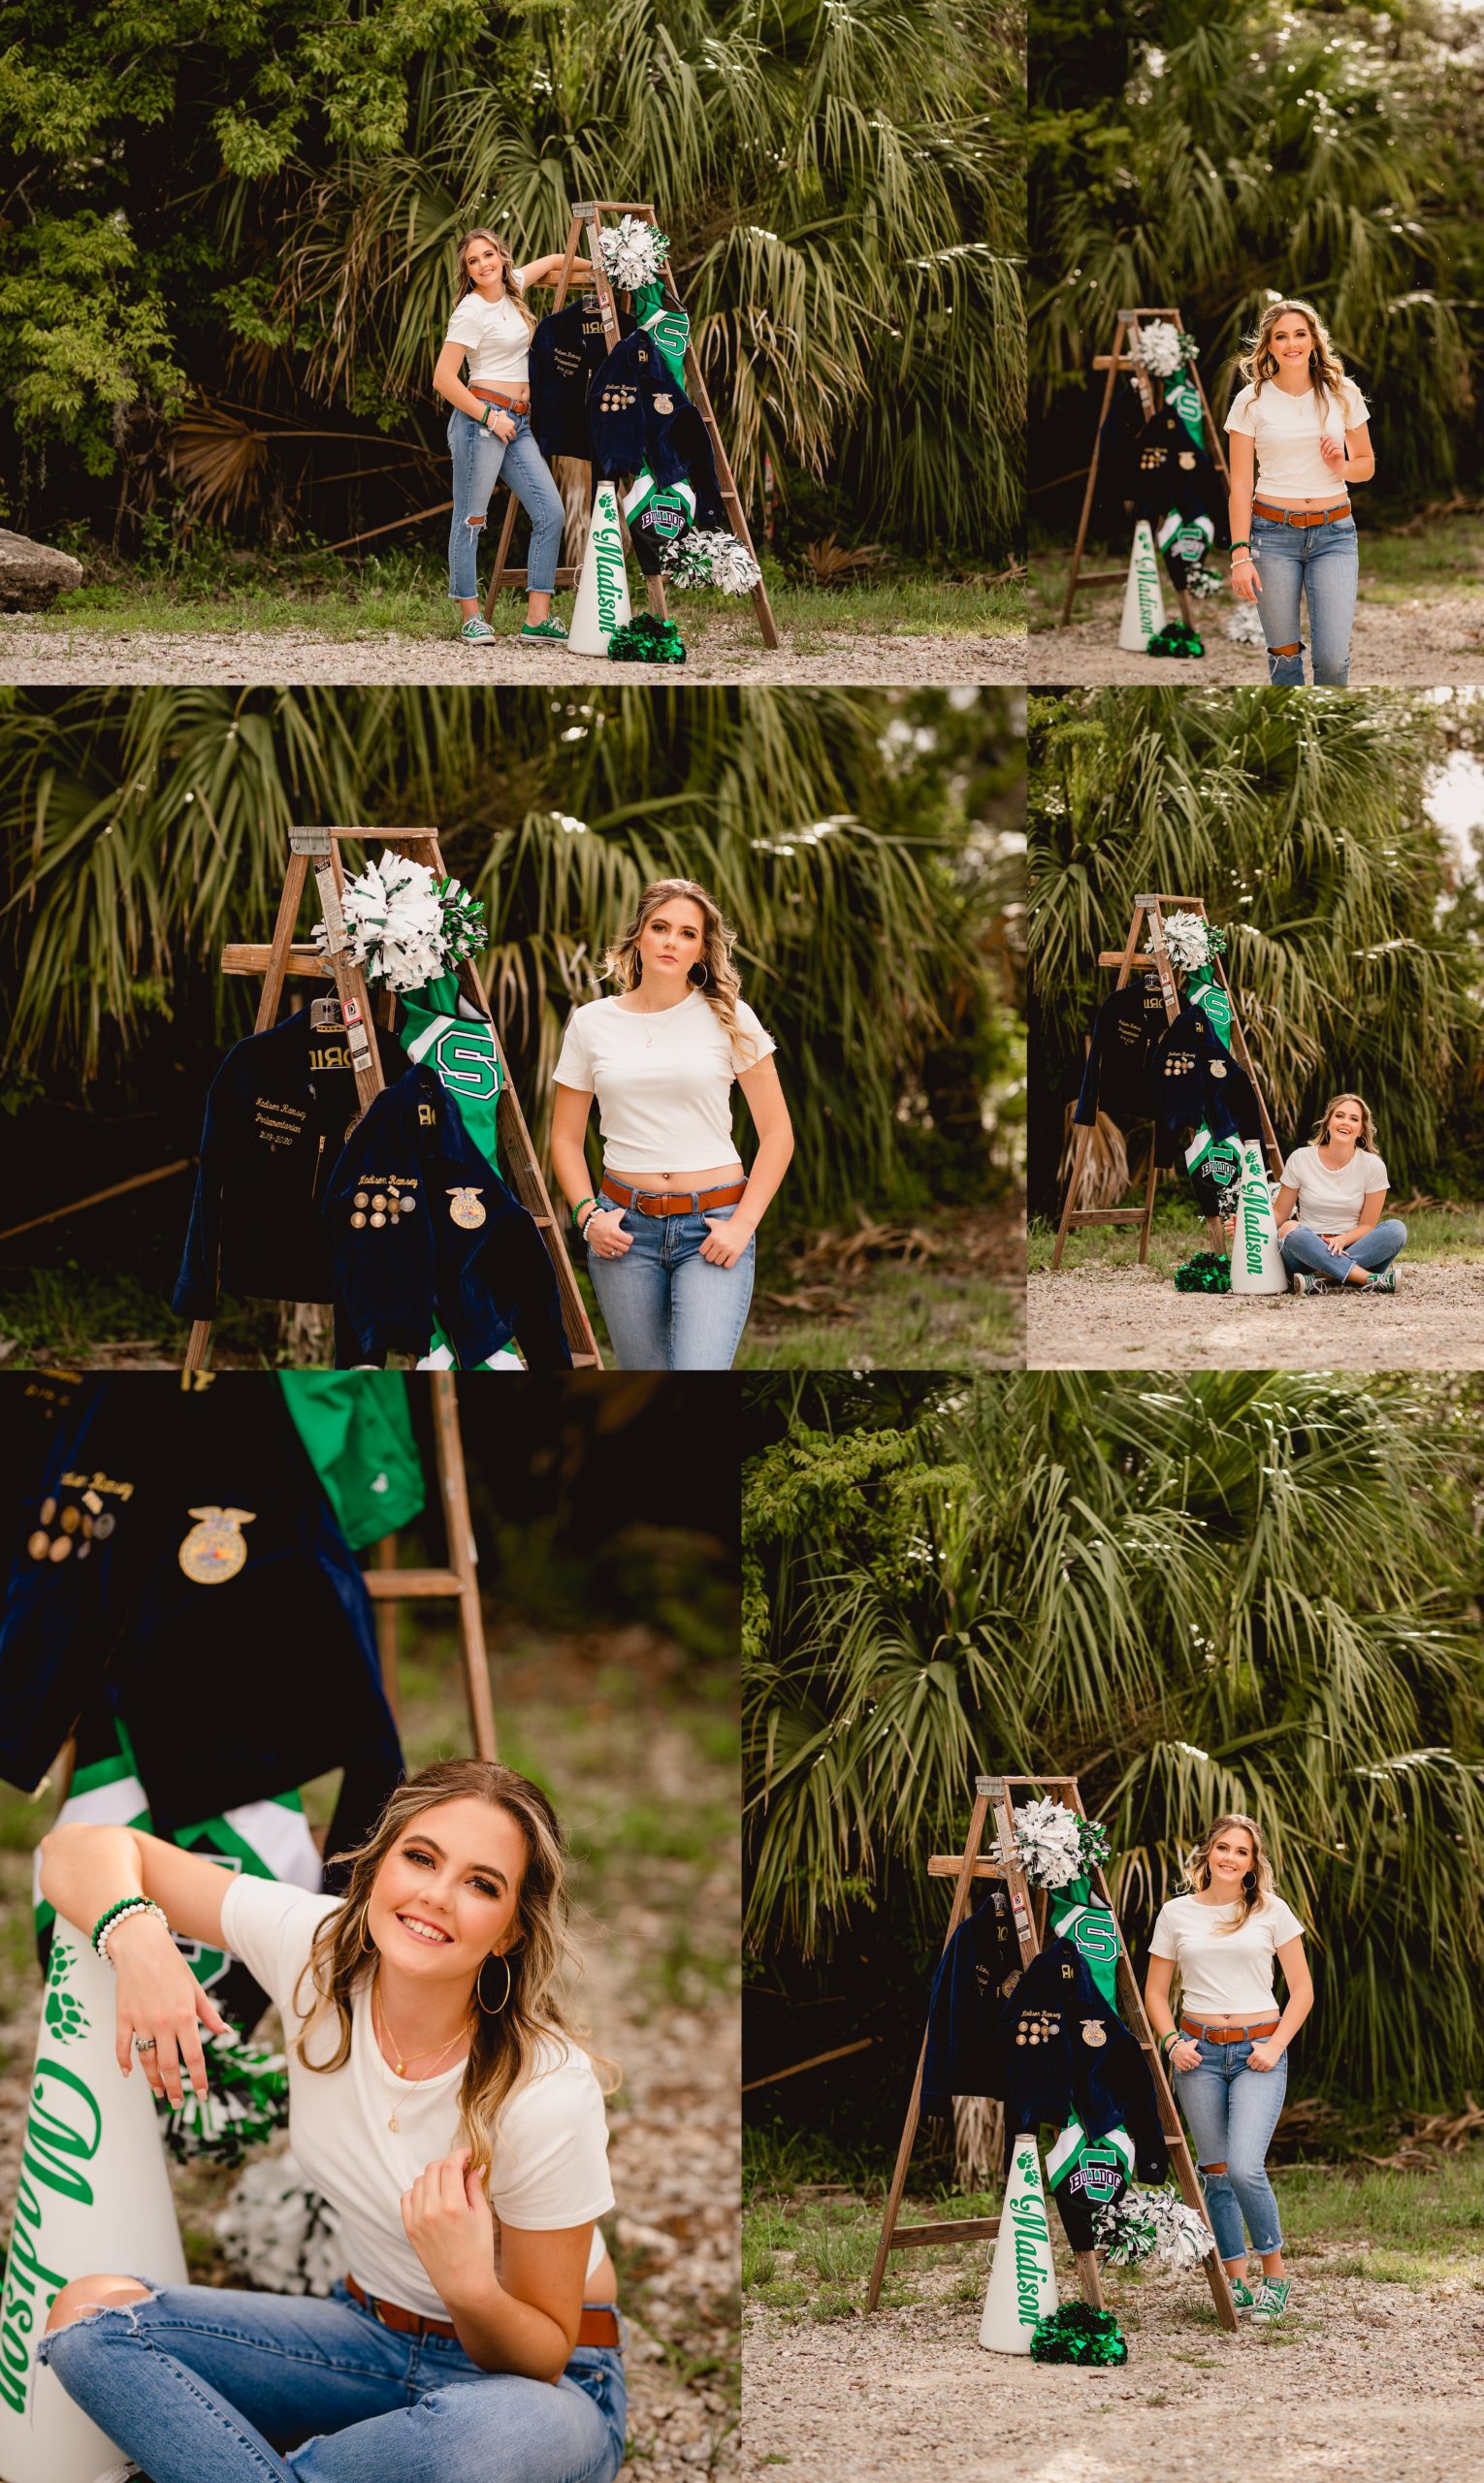 Senior photos with cheer uniforms and FFA jackets on old wooden ladder.